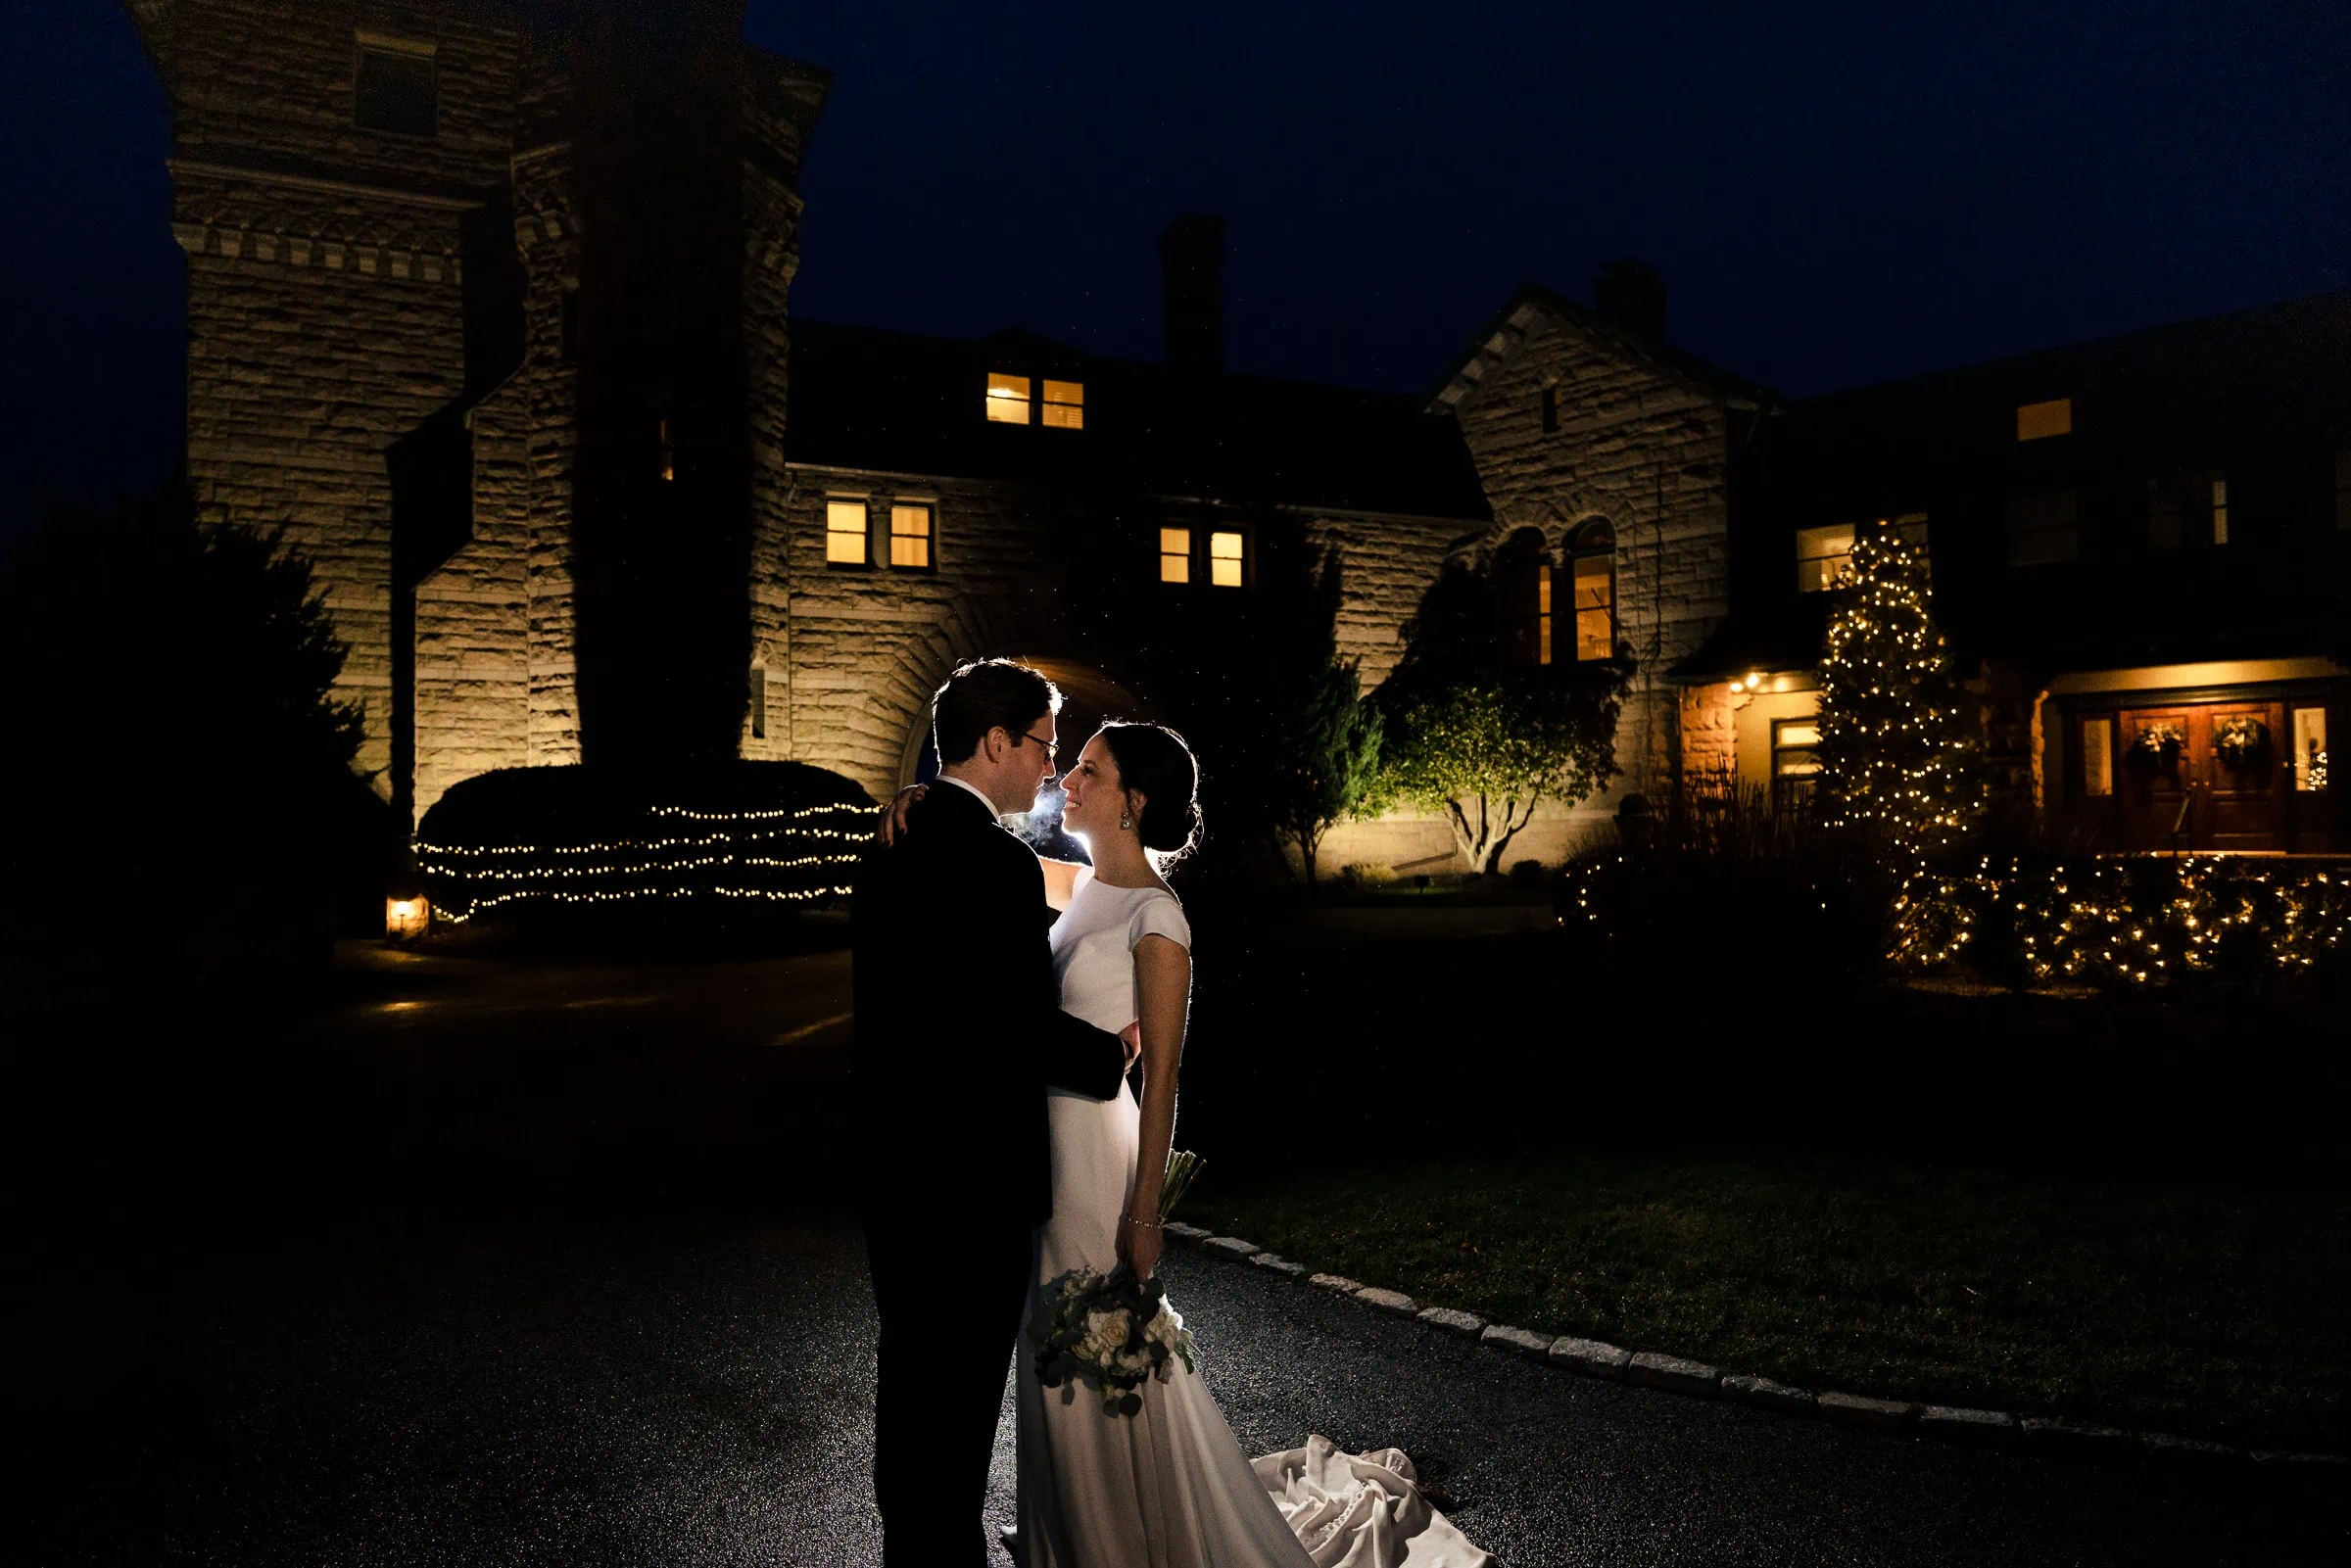 A bride and groom backlit against a mansion at night at their winter wedding in newport